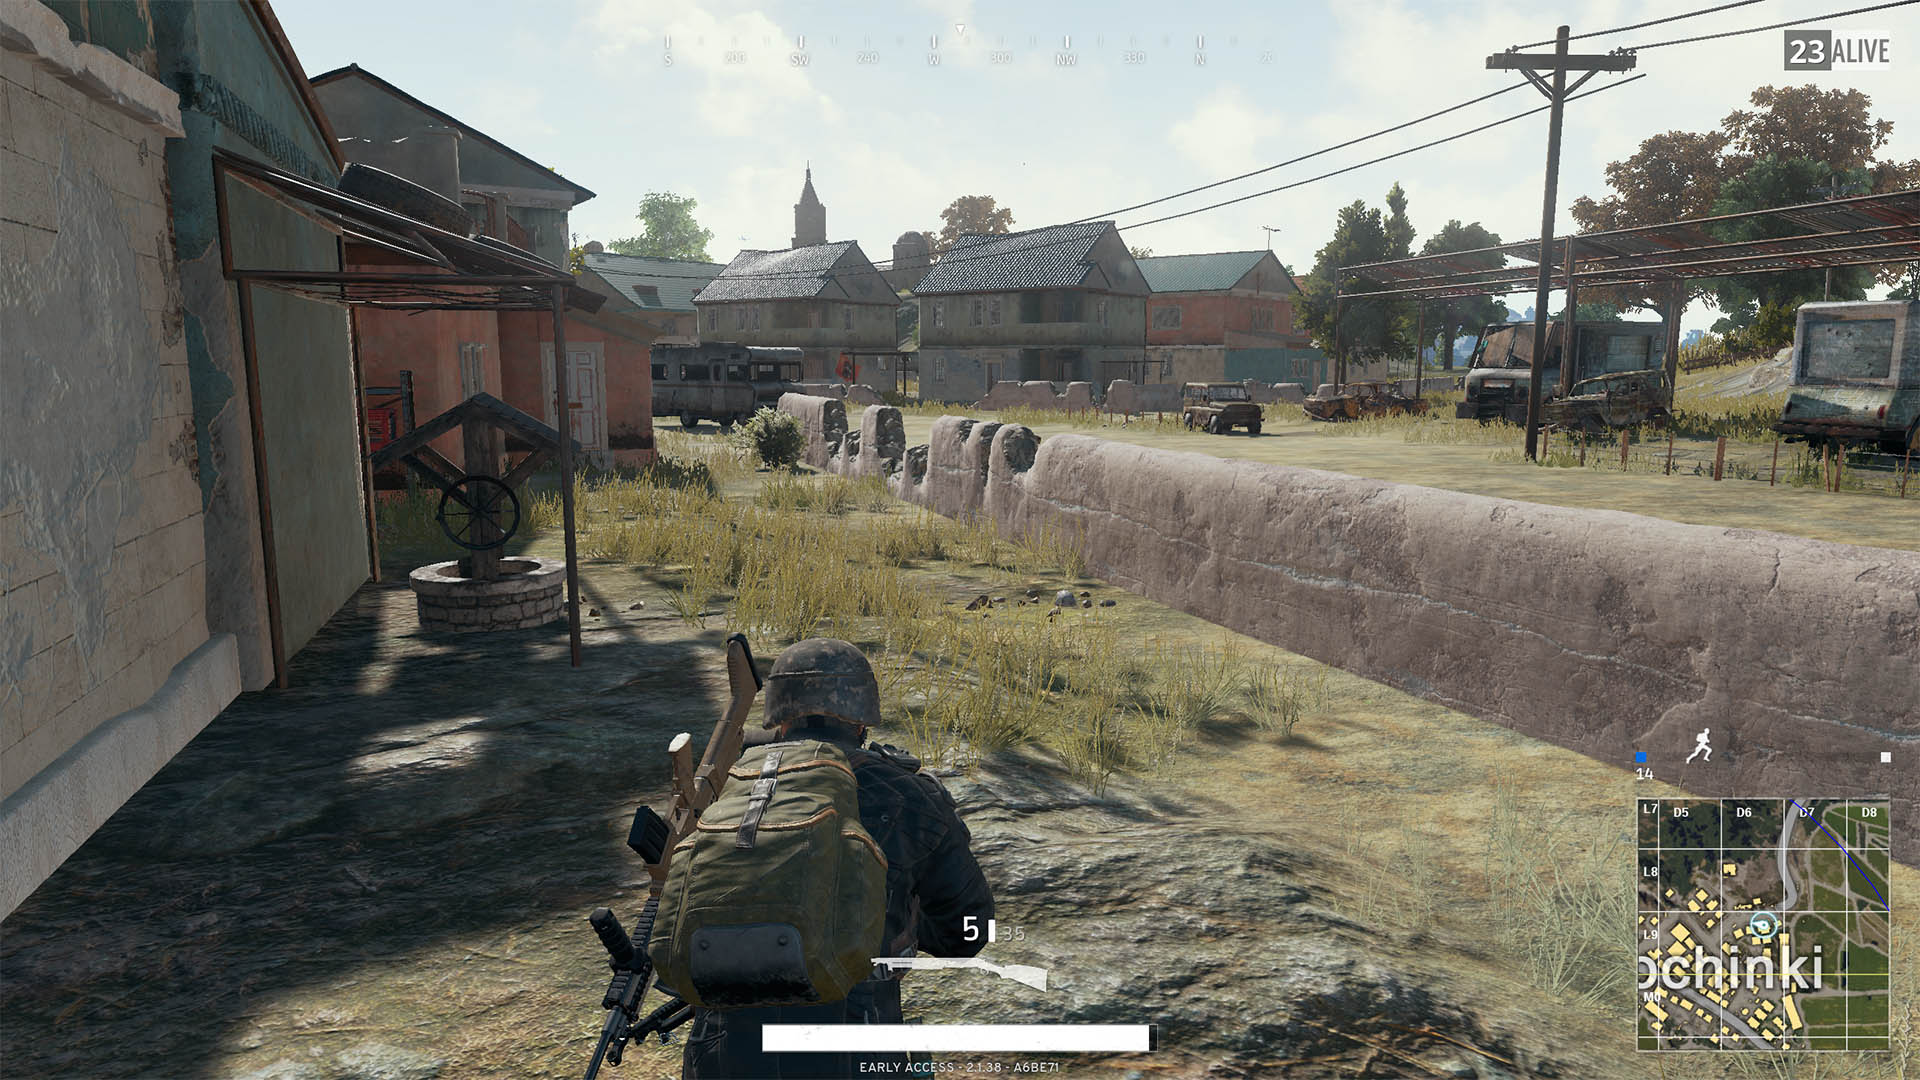 player unknown battlegrounds pc purchase